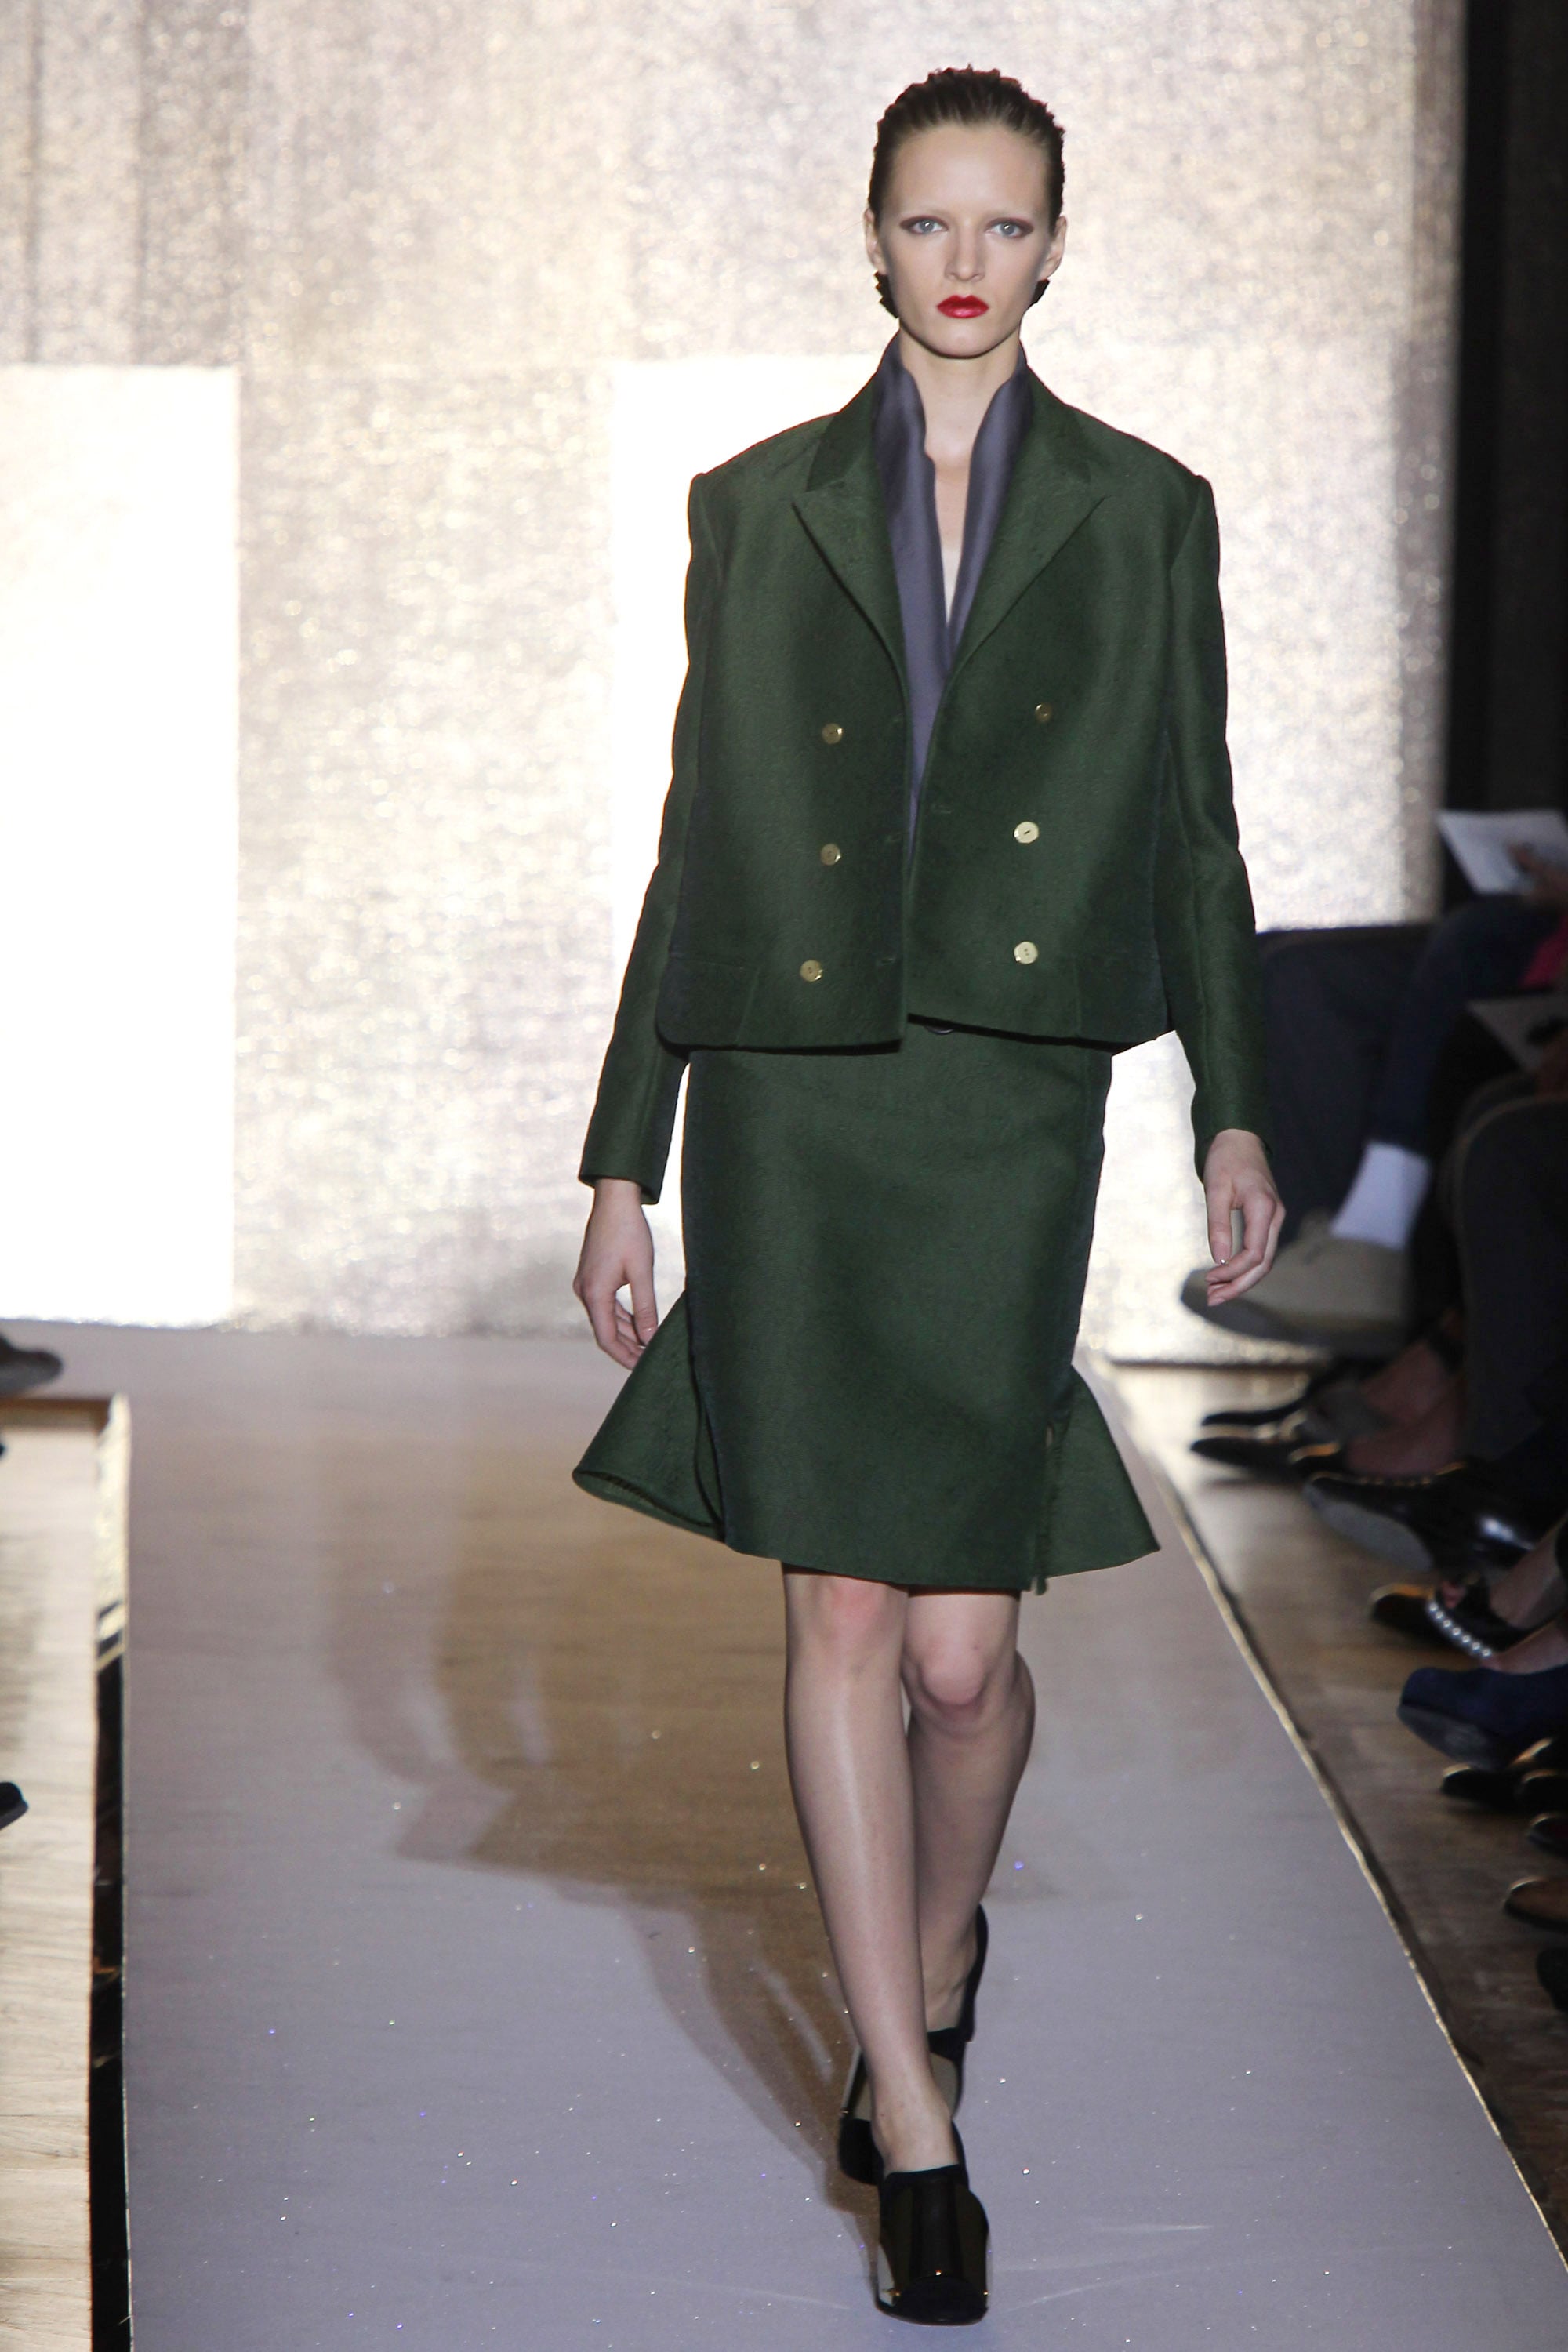 Review and Pictures of Yves Saint Laurent Runway Show at 2012 Spring ...